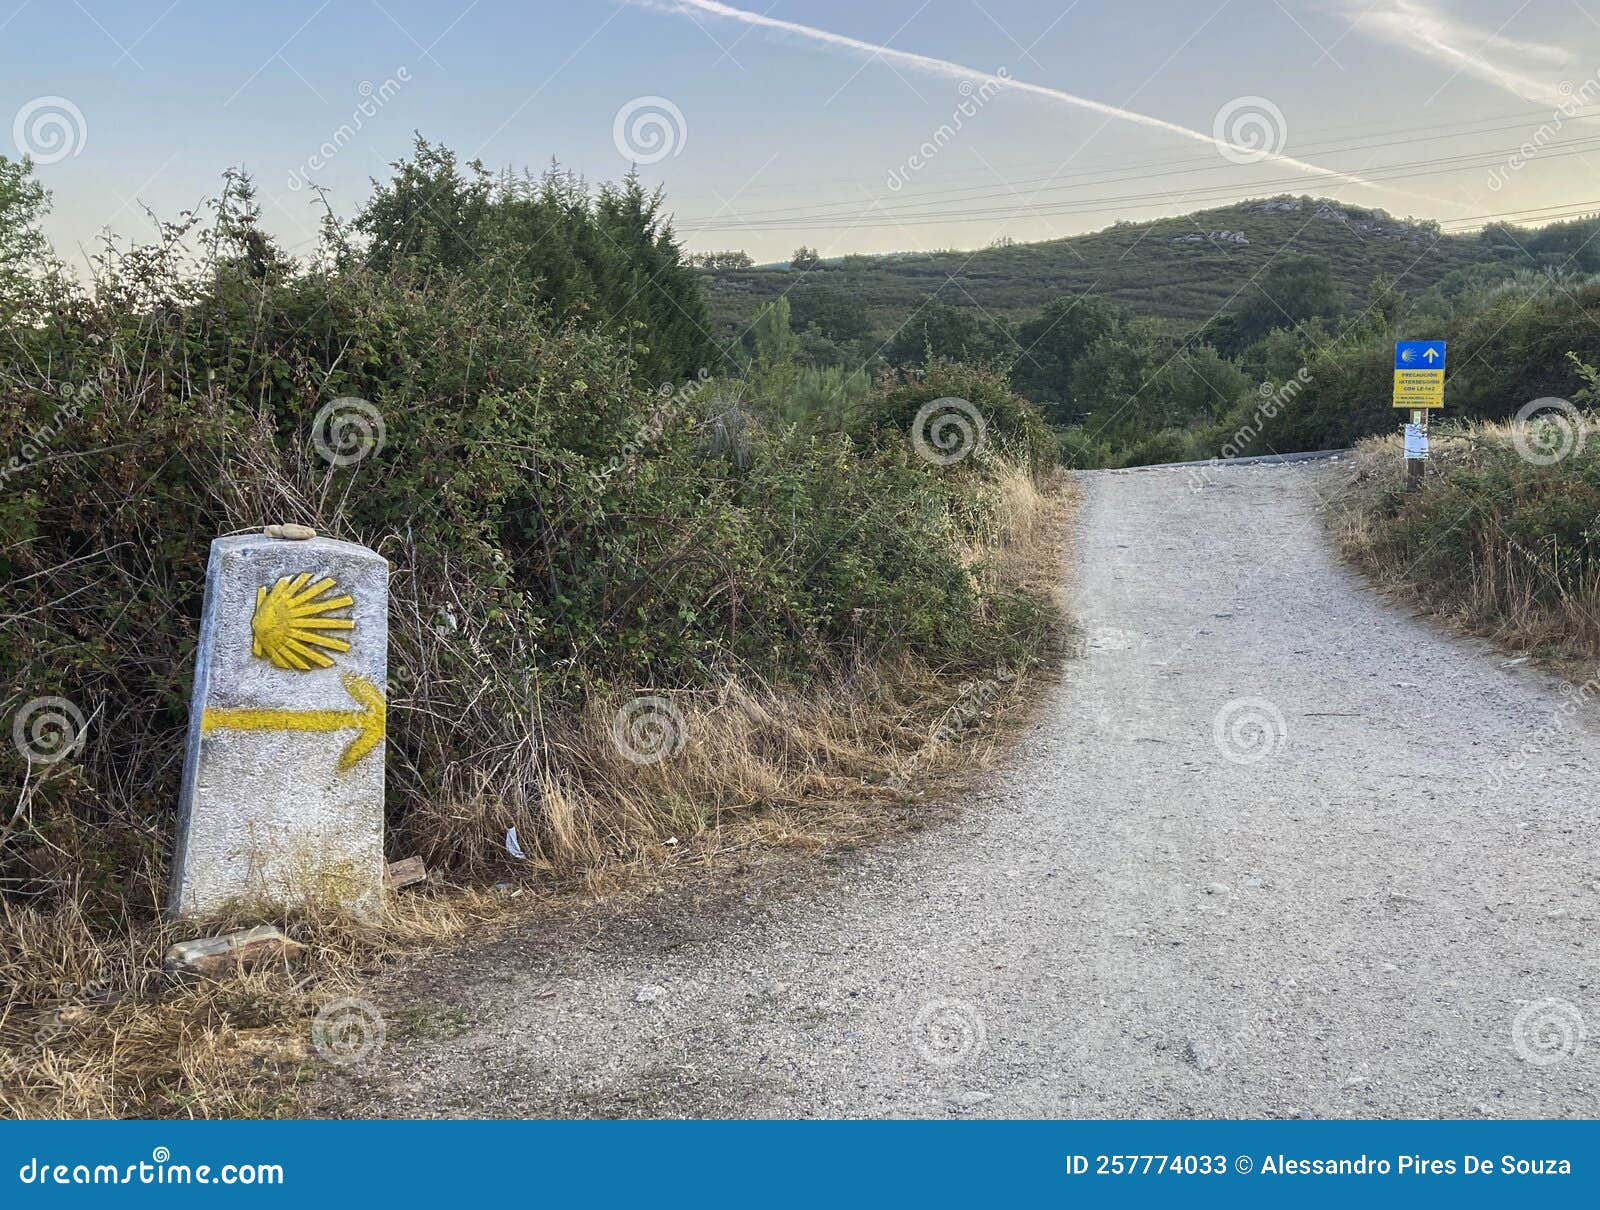 post mark with the yellow shell and arrow that guides the pilgrims along the camino de santiago, spain.